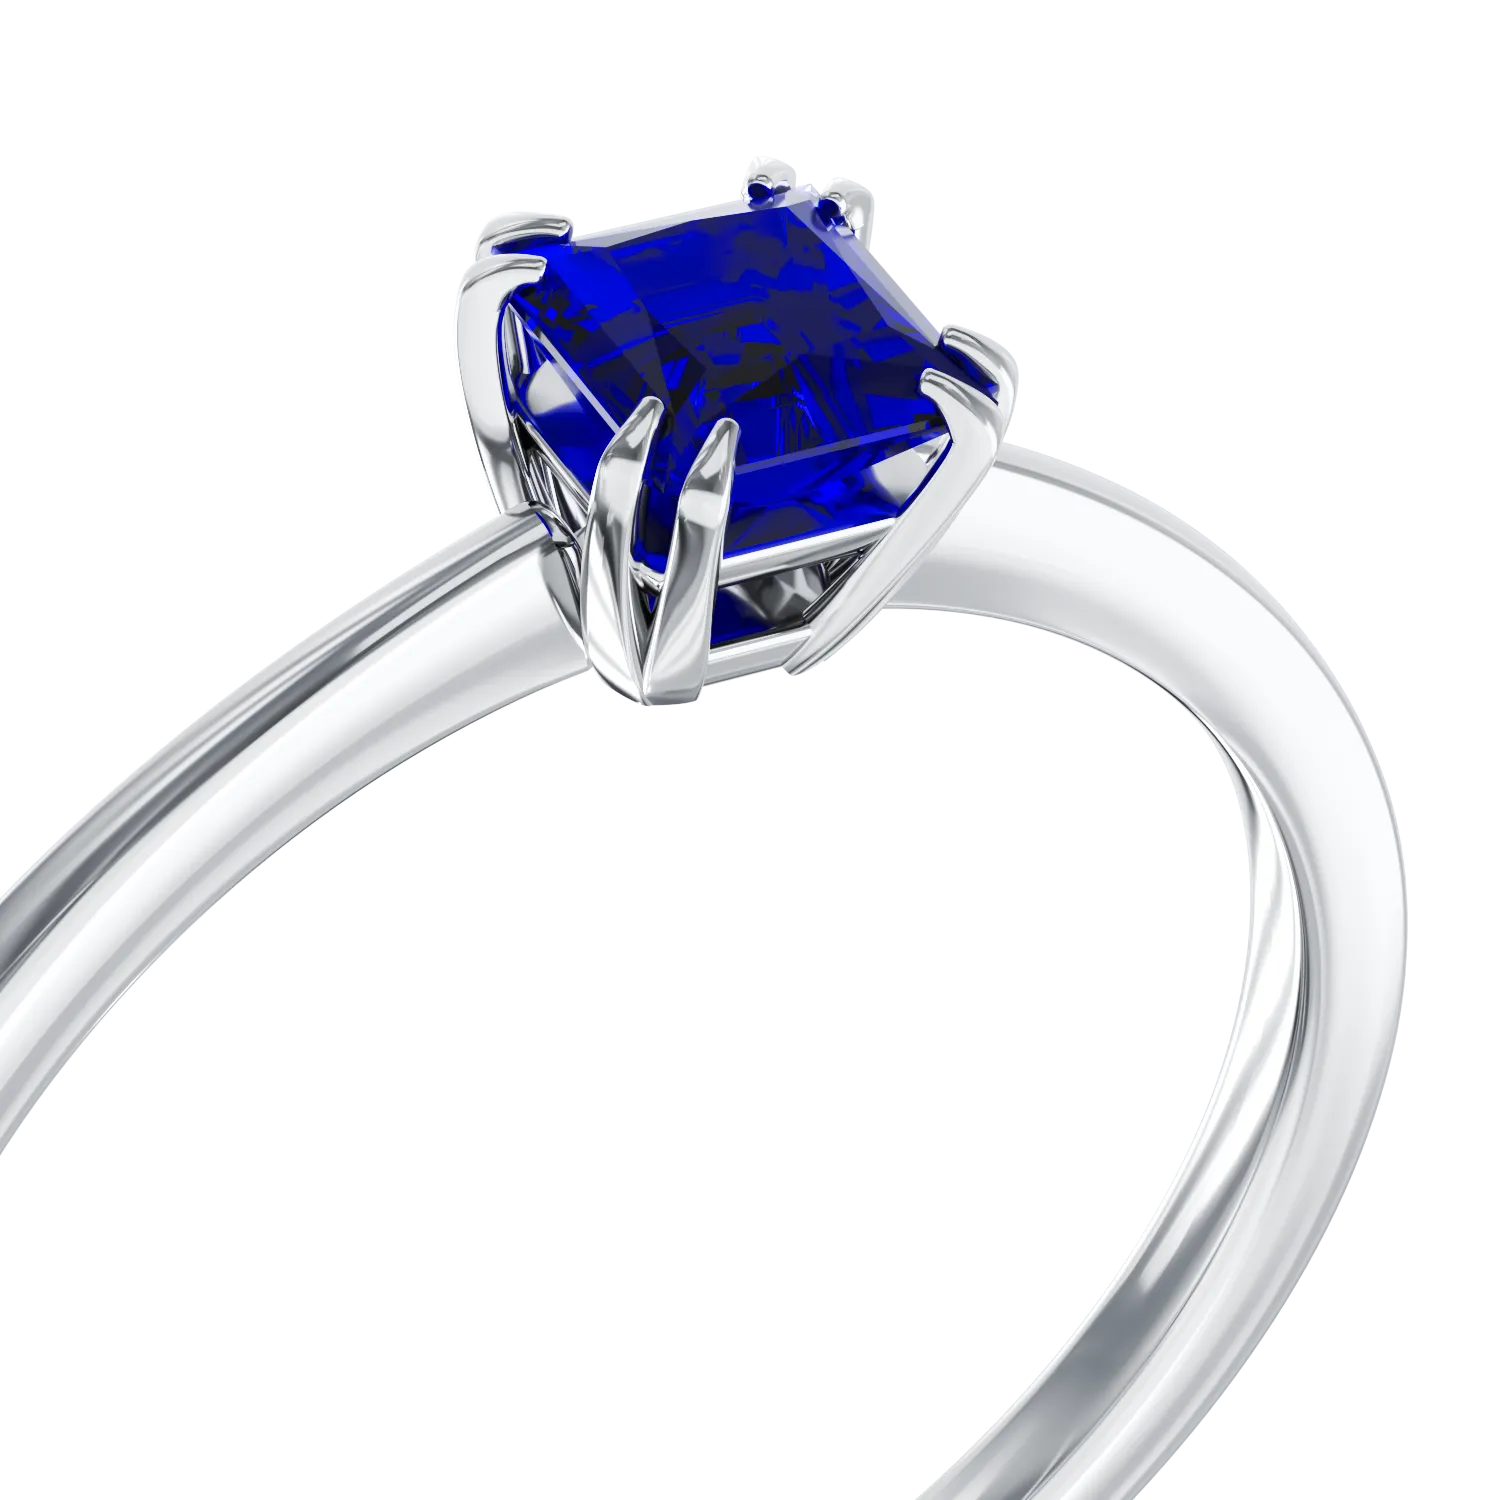 18K white gold engagement ring with 0.444ct sapphire